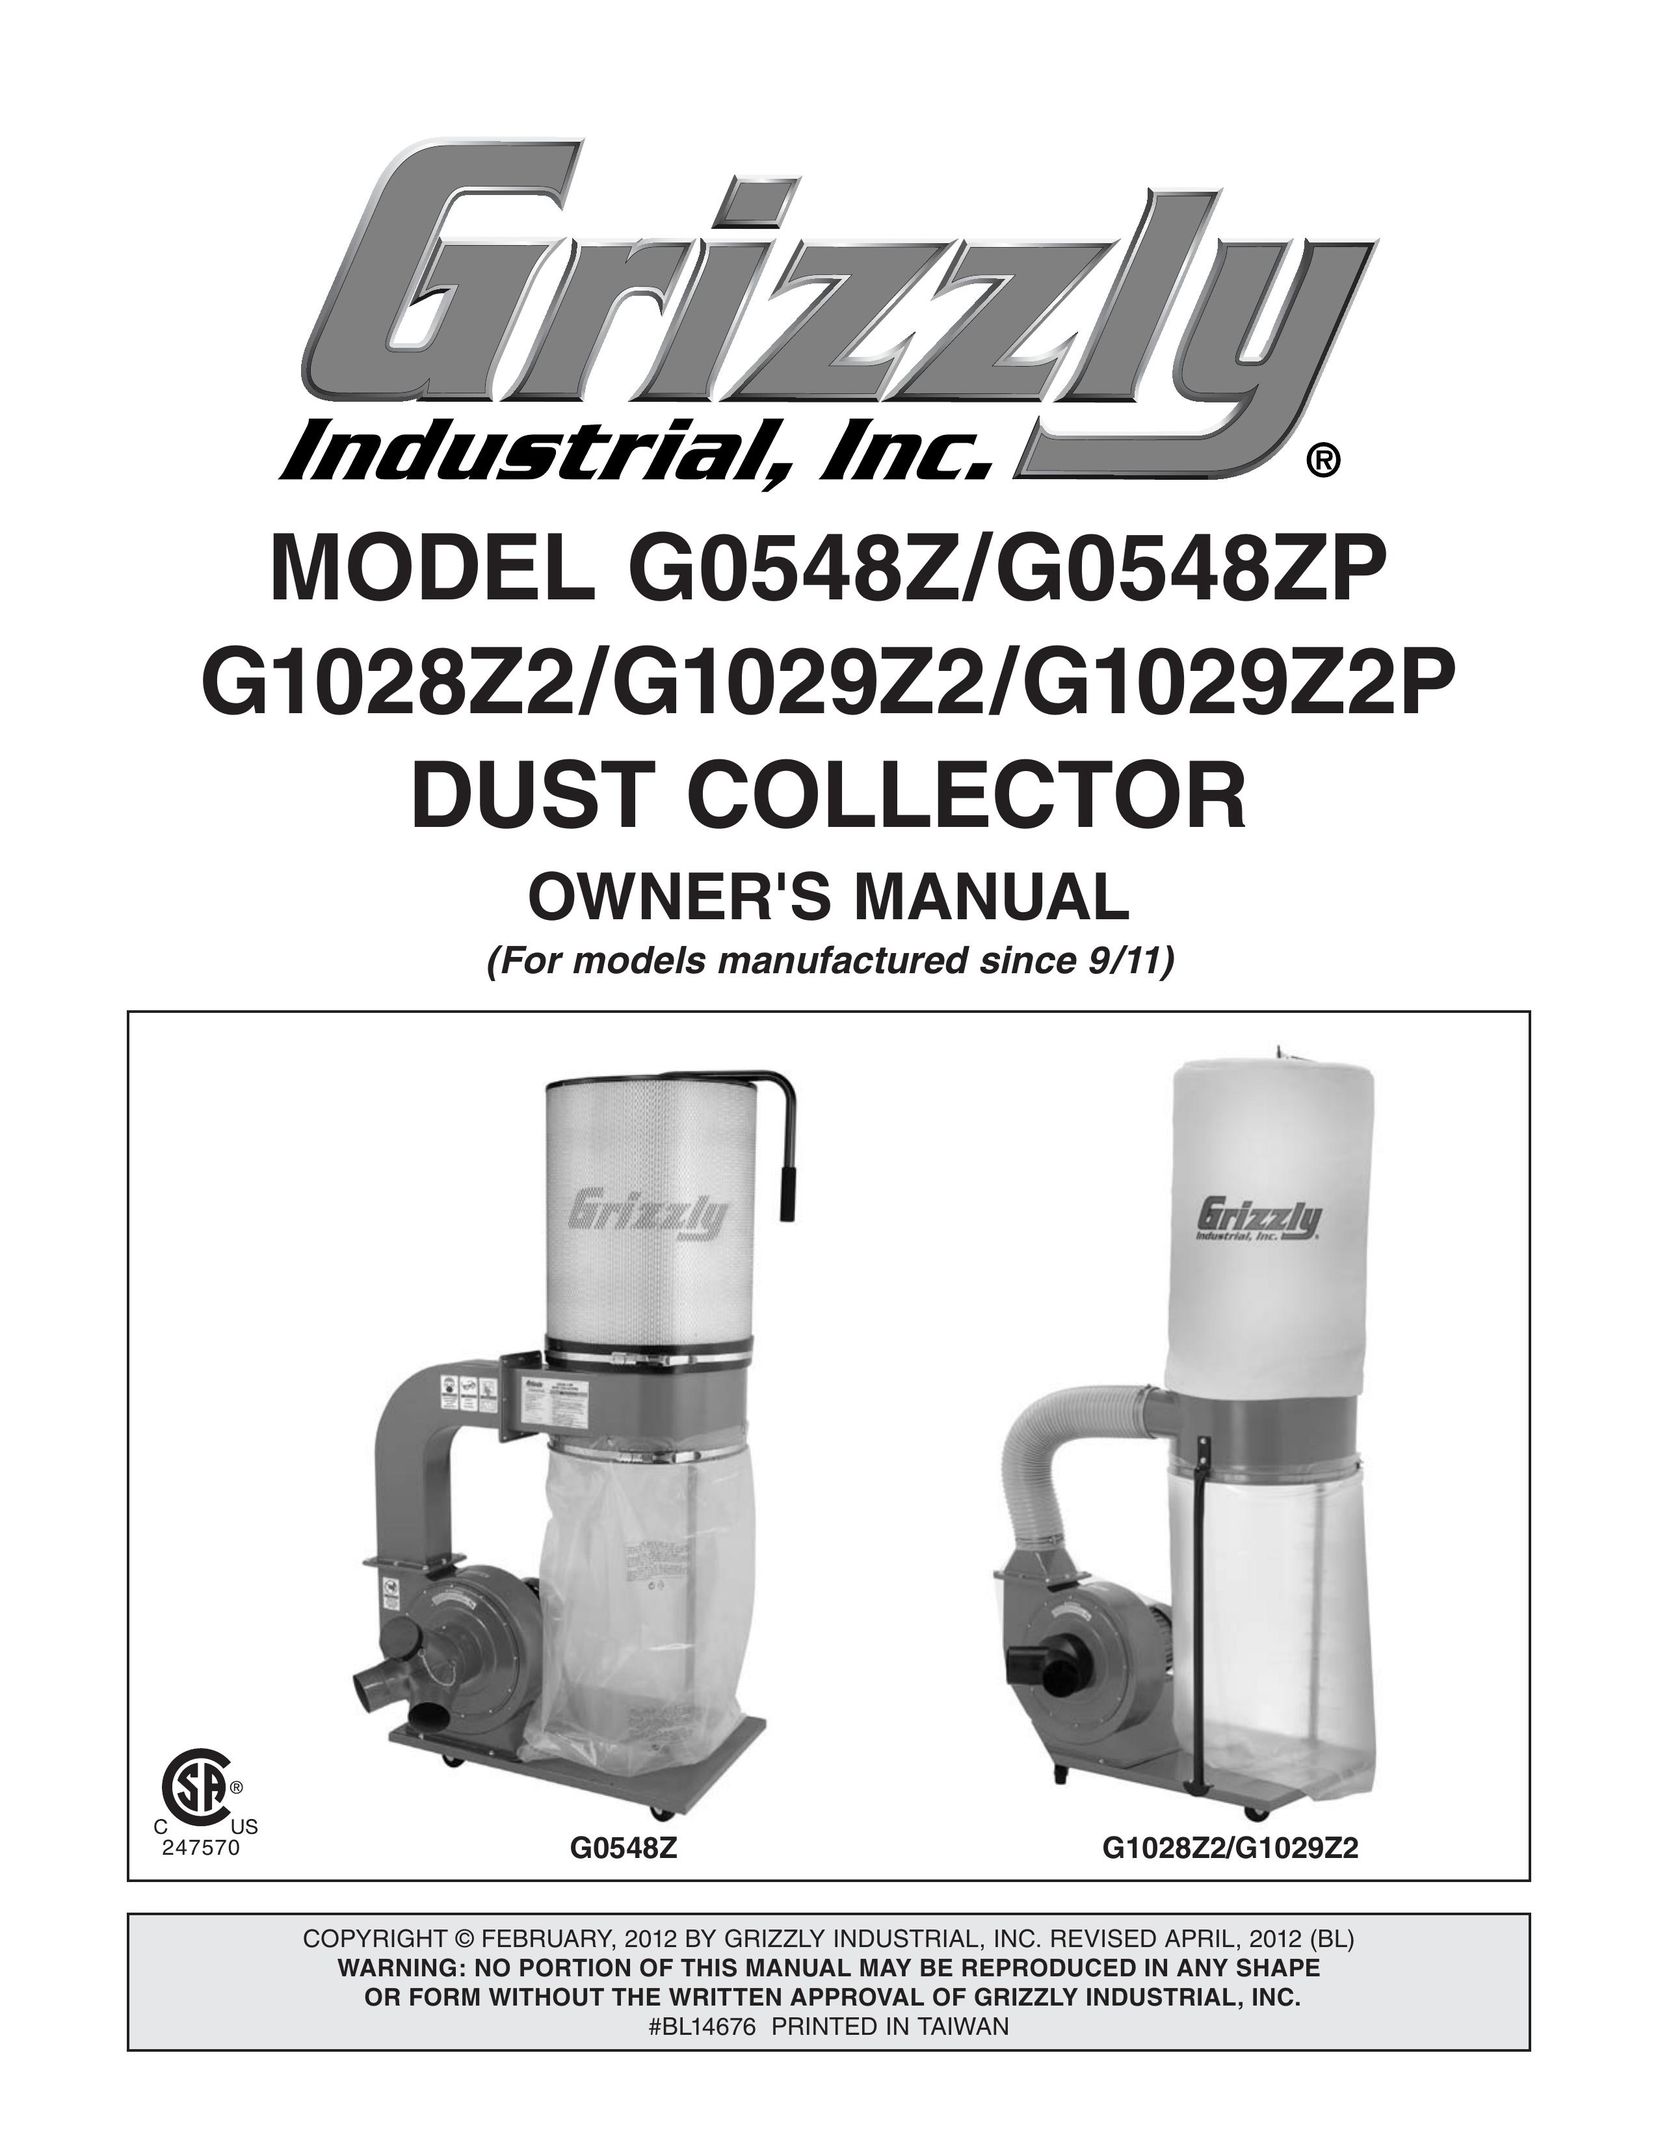 Grizzly G1029Z2P Dust Collector User Manual